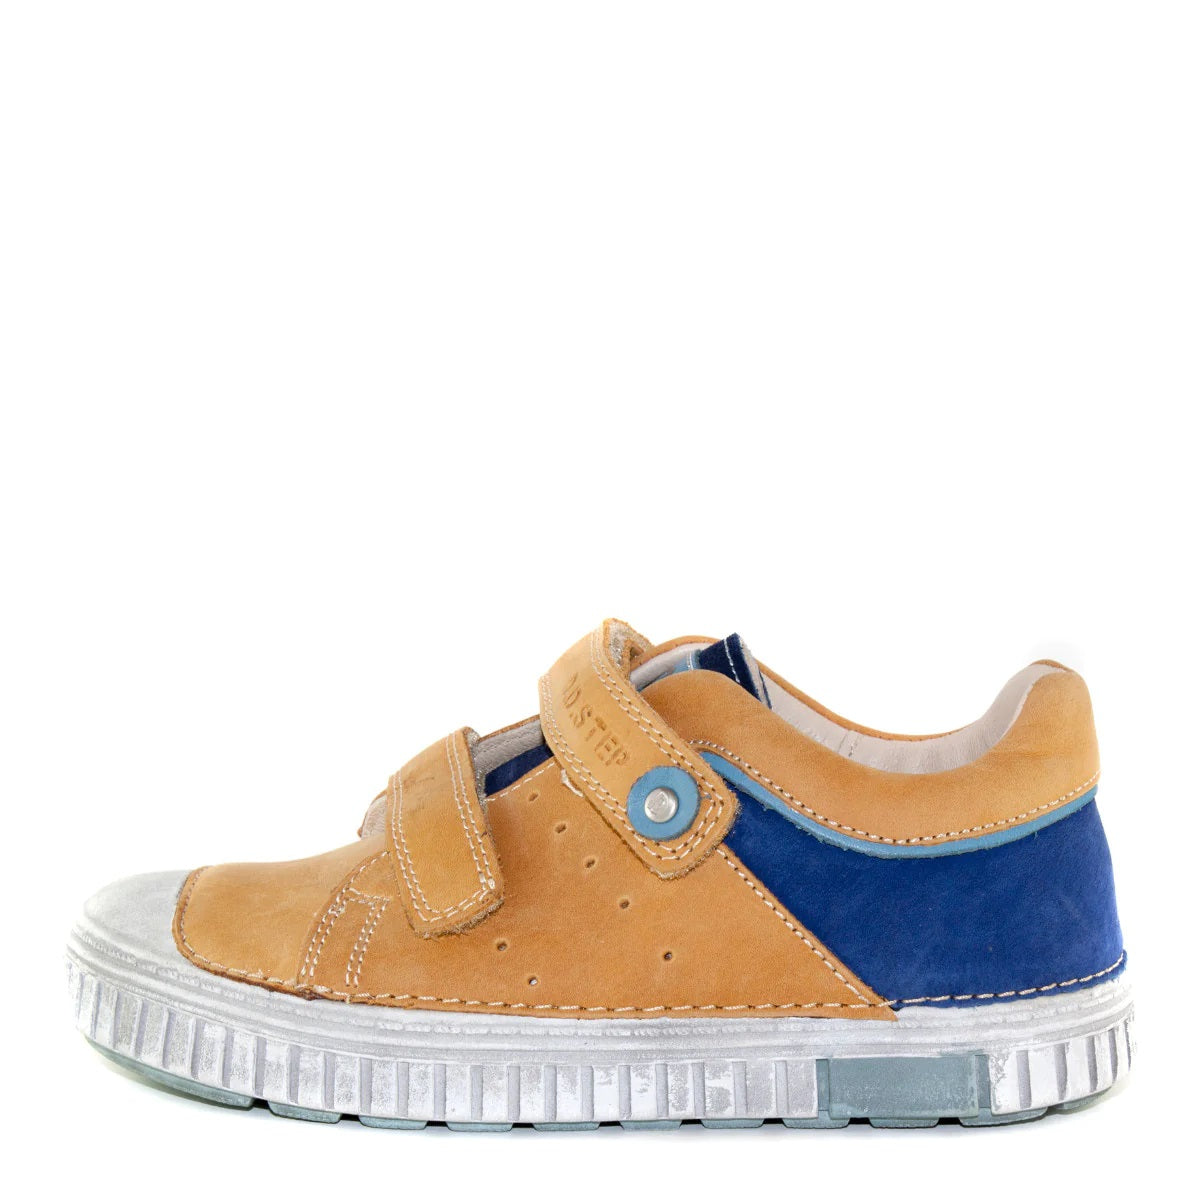 Premium quality sneaker with genuine leather lining and upper sandy brown with blue heel. Thanks to its high level of specialization, D.D. Step knows exactly what your child’s feet need, to develop properly in the various phases of growth. The exceptional comfort these shoes provide assure the well-being and happiness of your child.